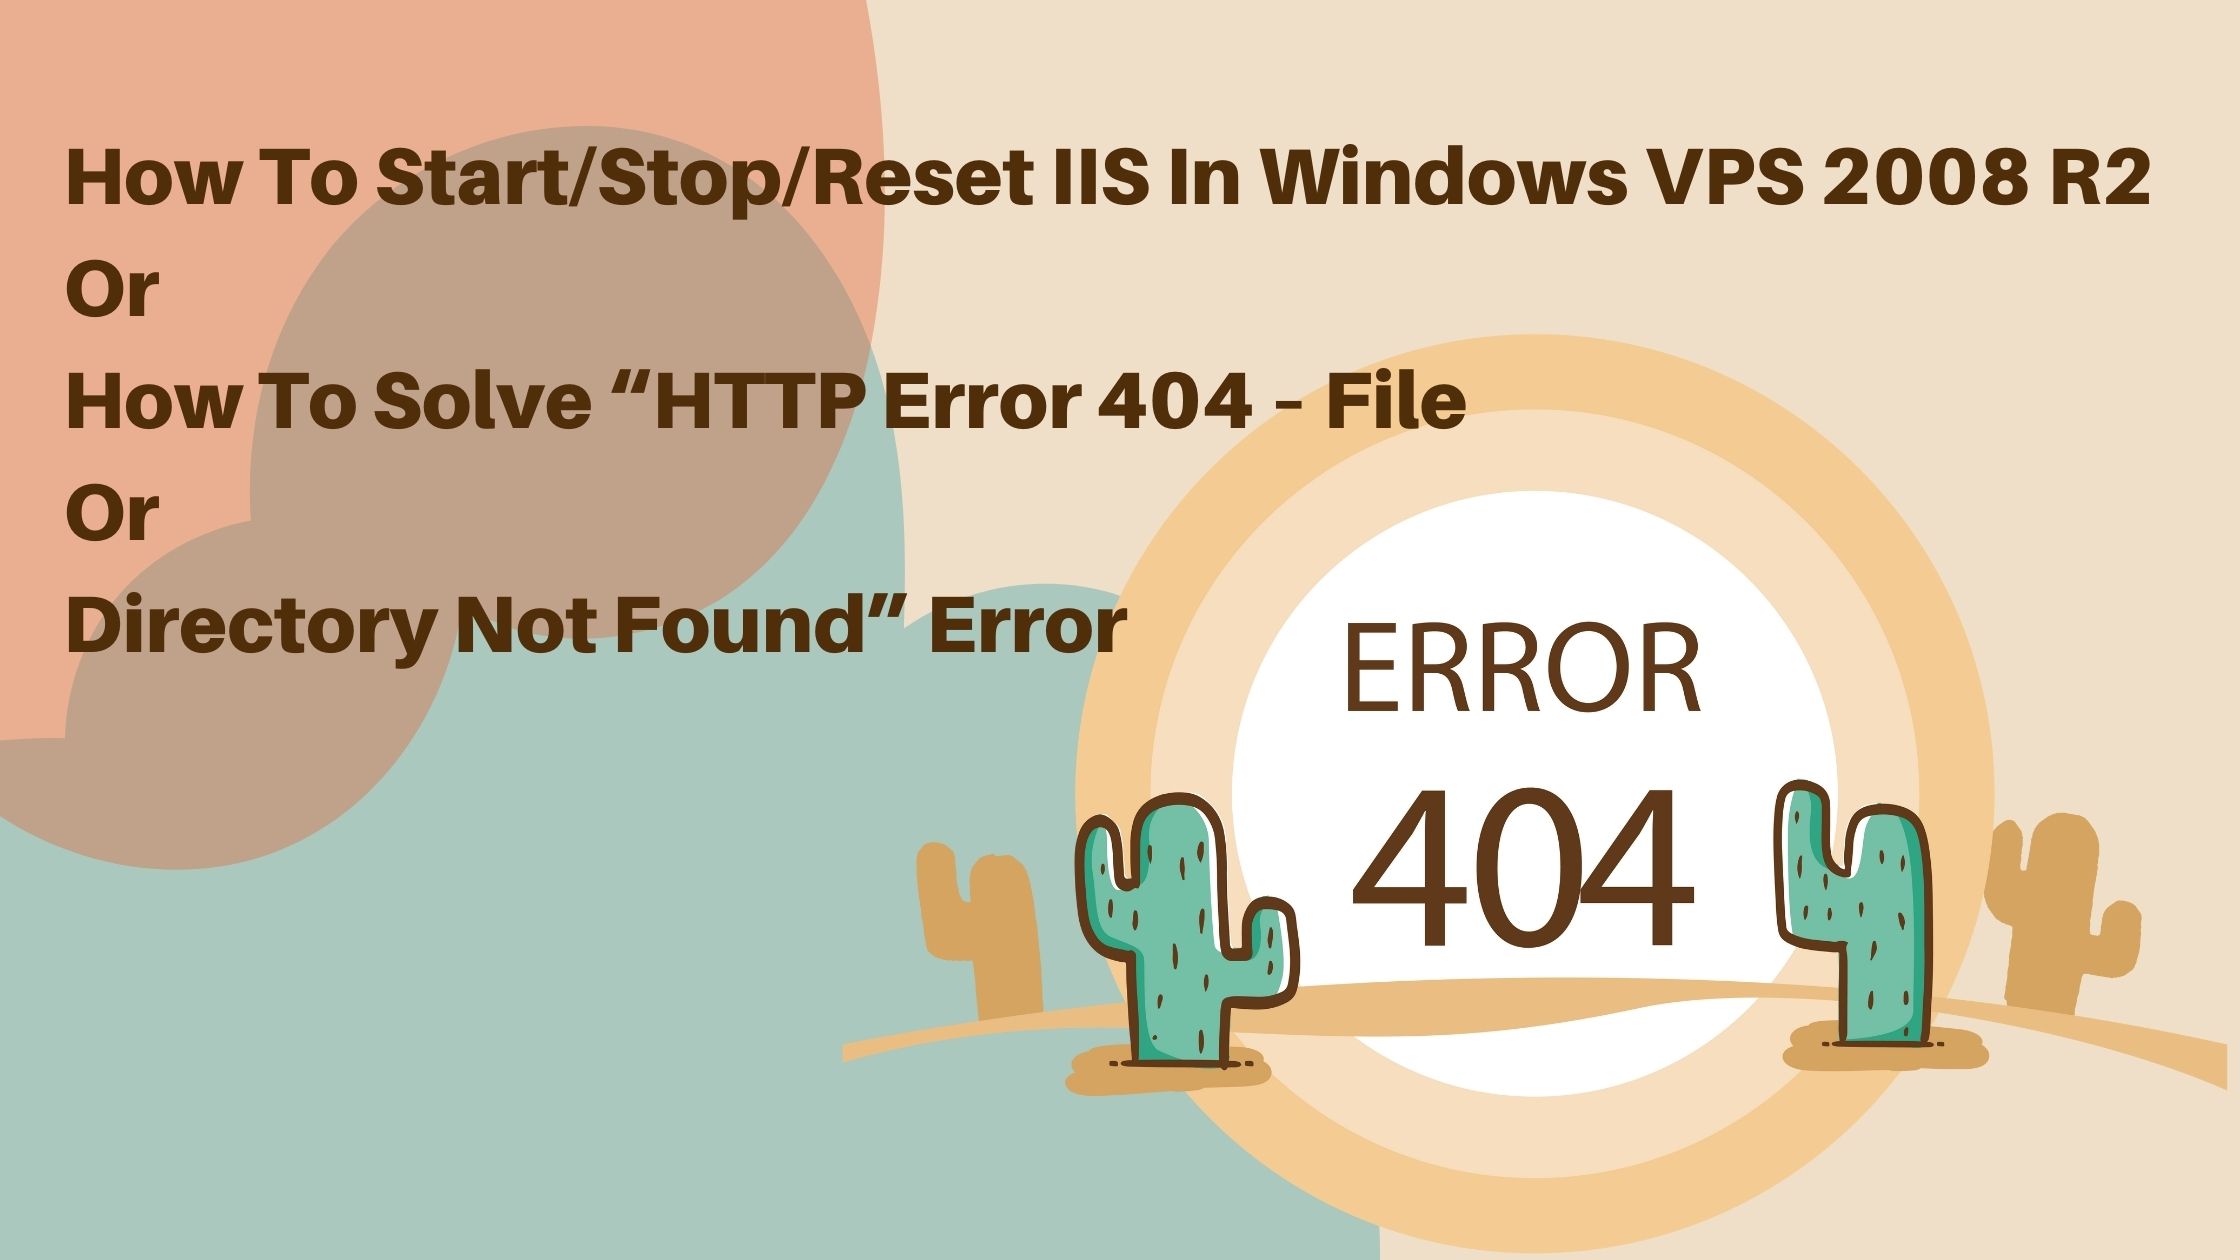 How To Start/Stop/Reset IIS In Windows Vps 2008 R2 Or How To Solve “HTTP Error 404 – File Or Directory Not Found” Error?